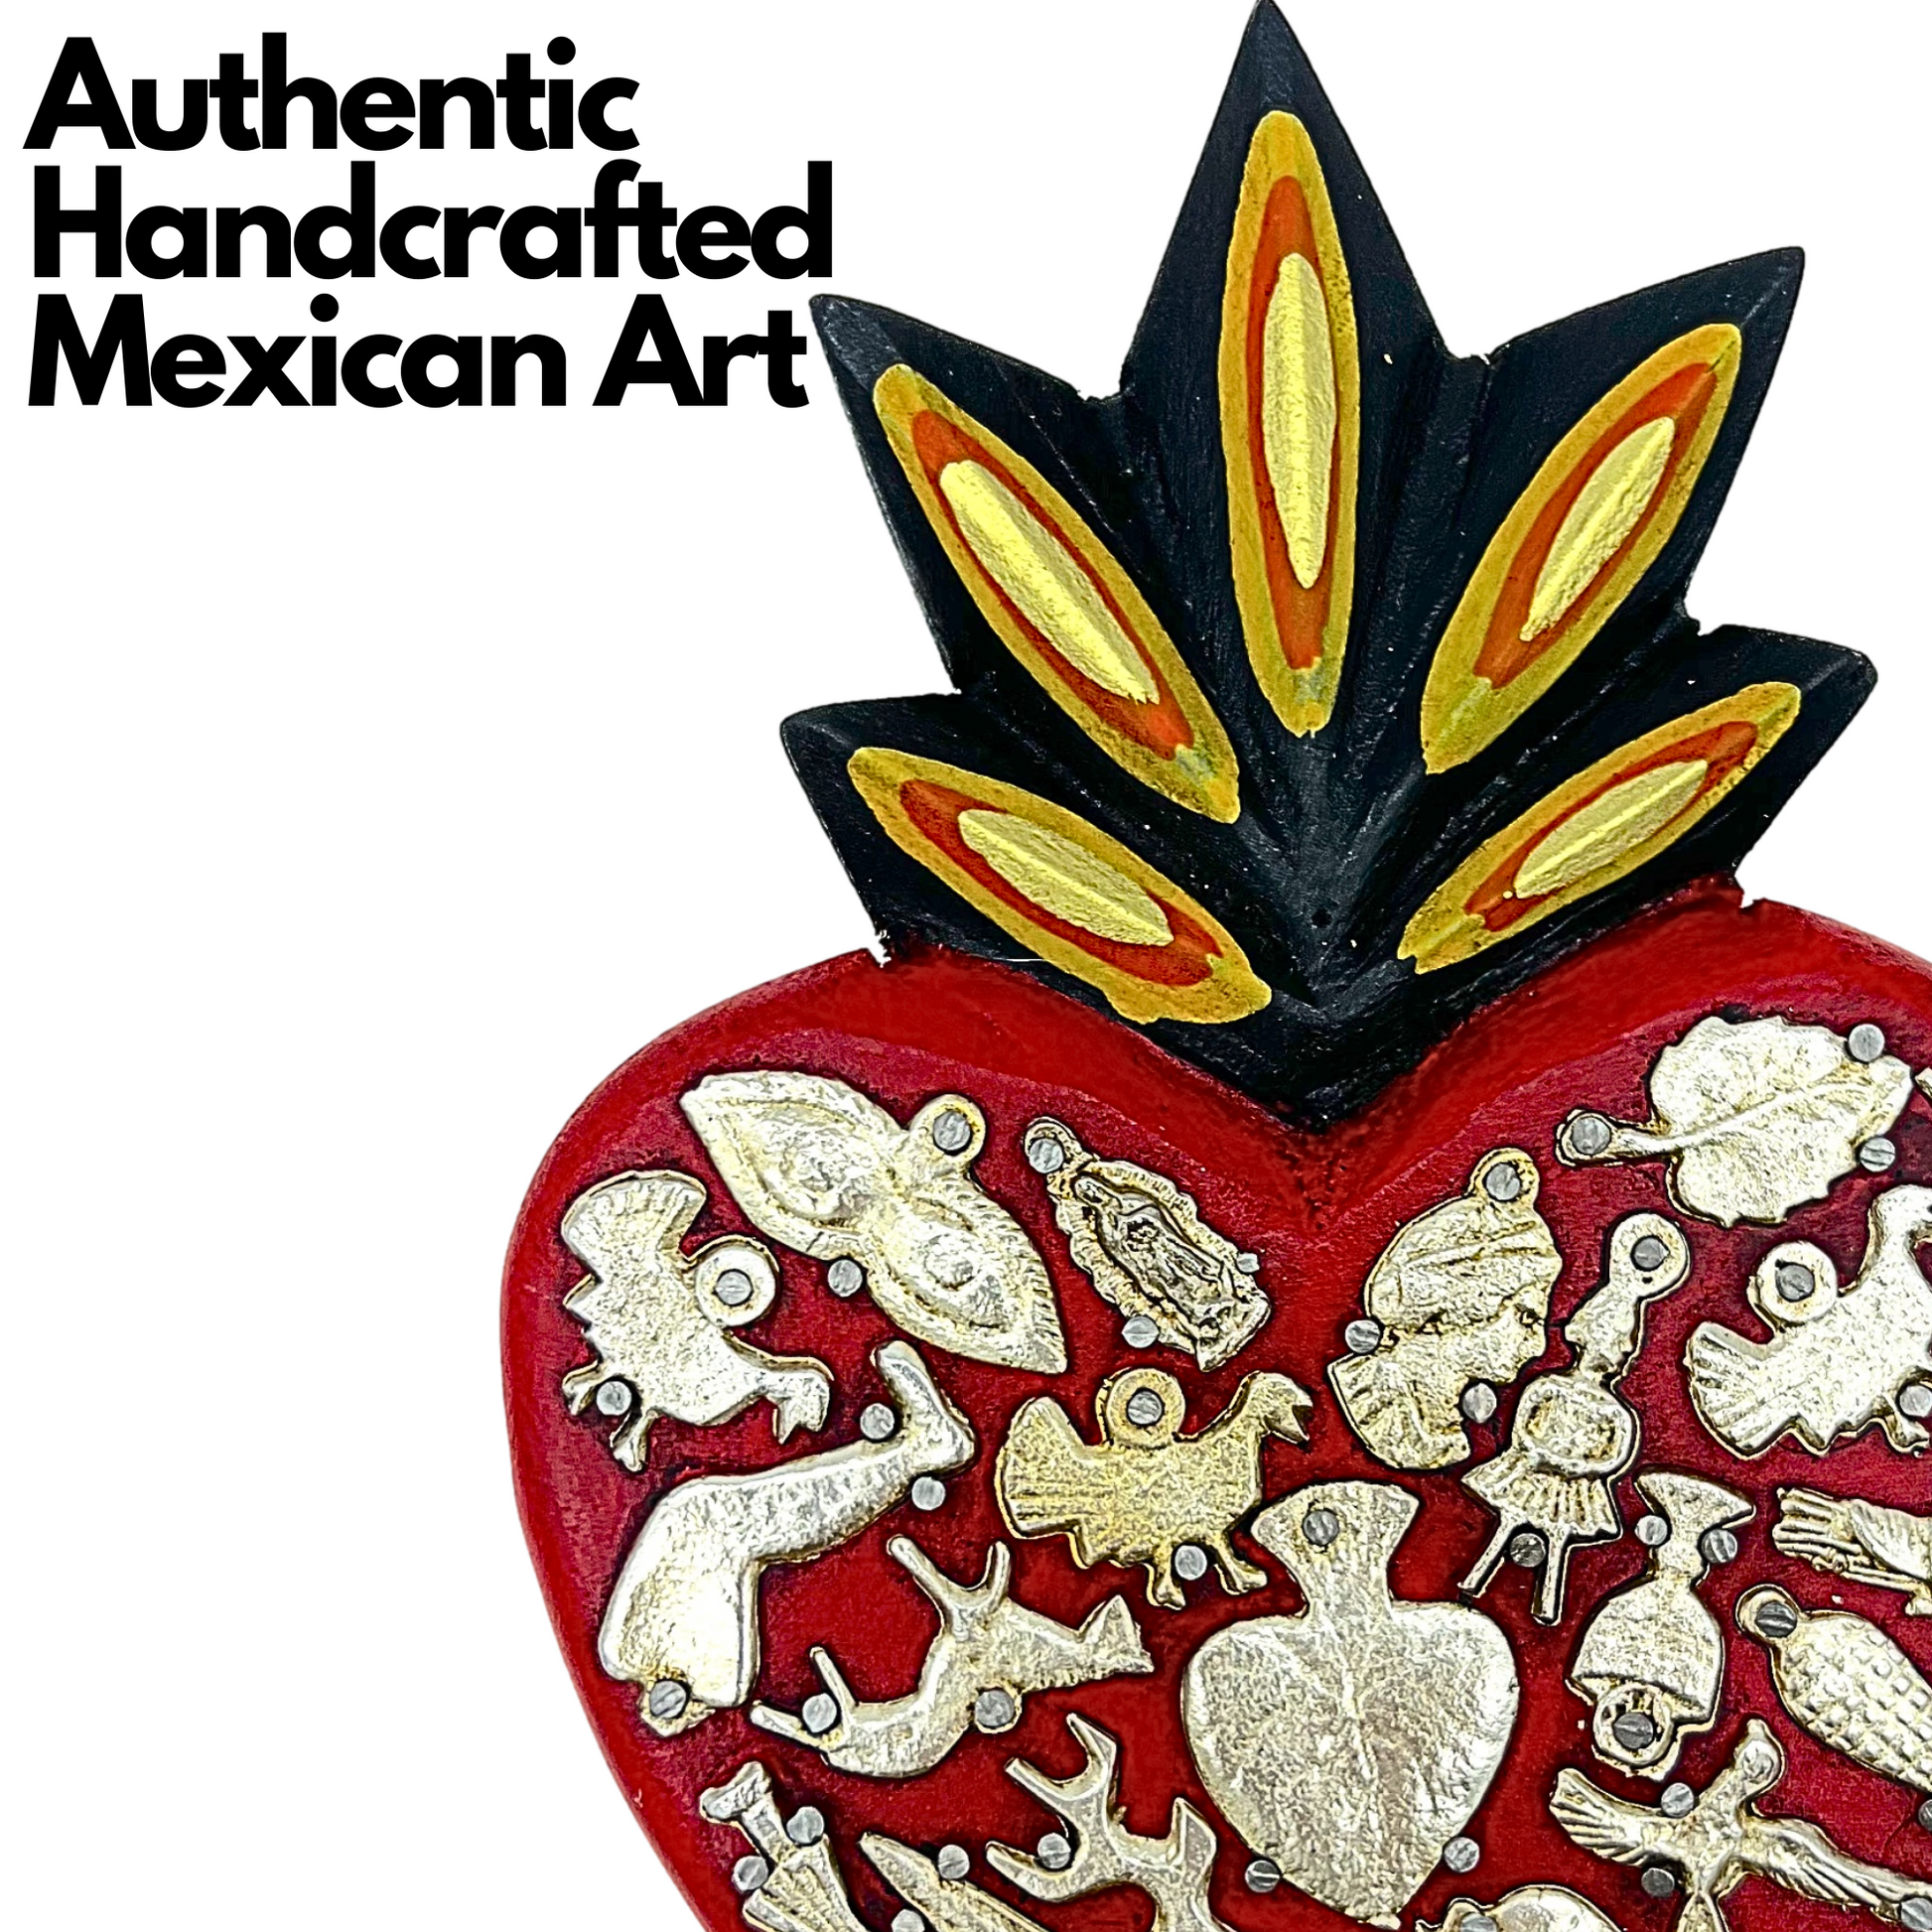 authentic handcrafted mexican art Main Image Casa Fiesta Designs' Ex Voto Sacred Heart - Handcrafted and Hand-painted Mexican Milagros Wall Decor.